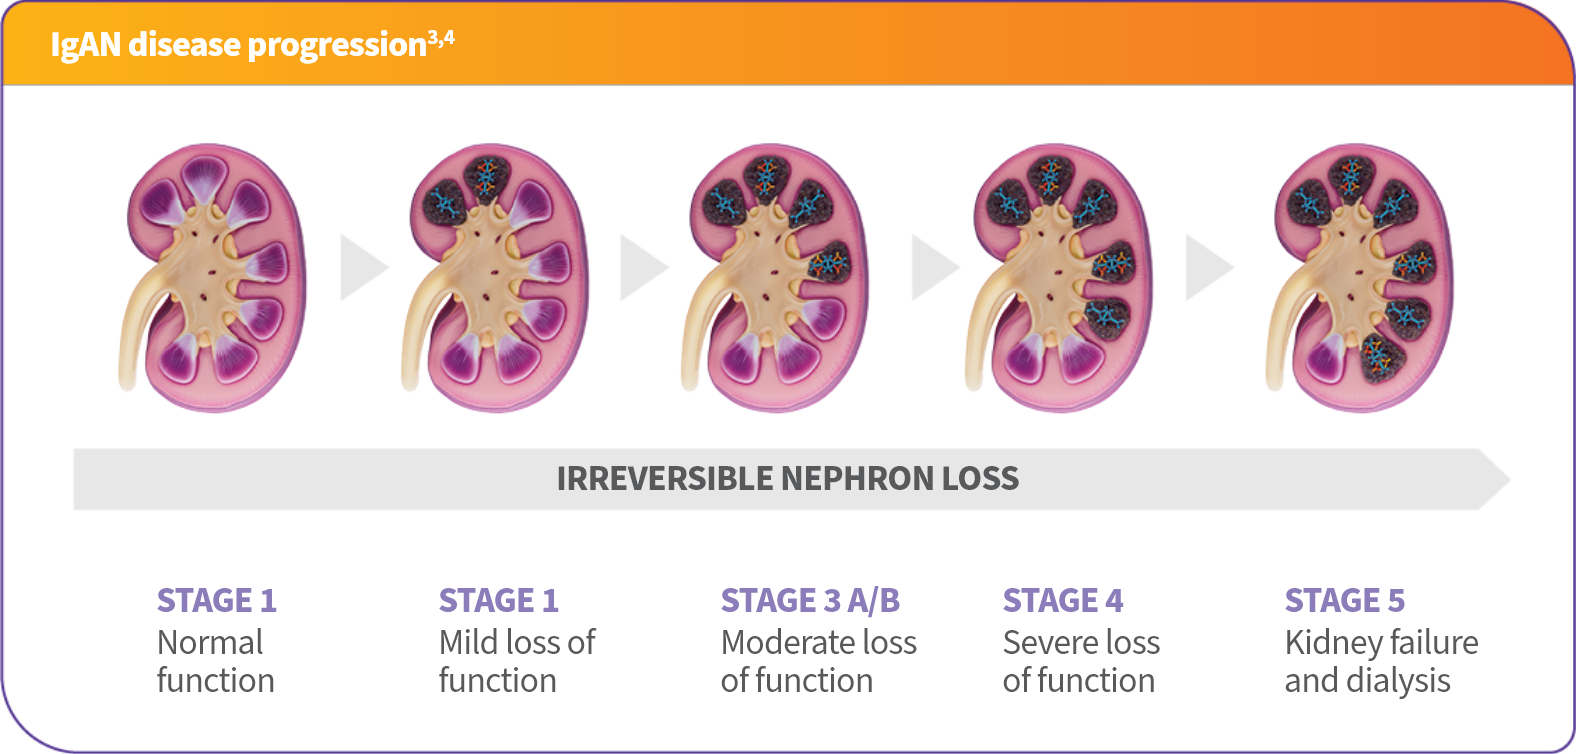 Chart with the five stages of igan disease progression with graphics of kidneys